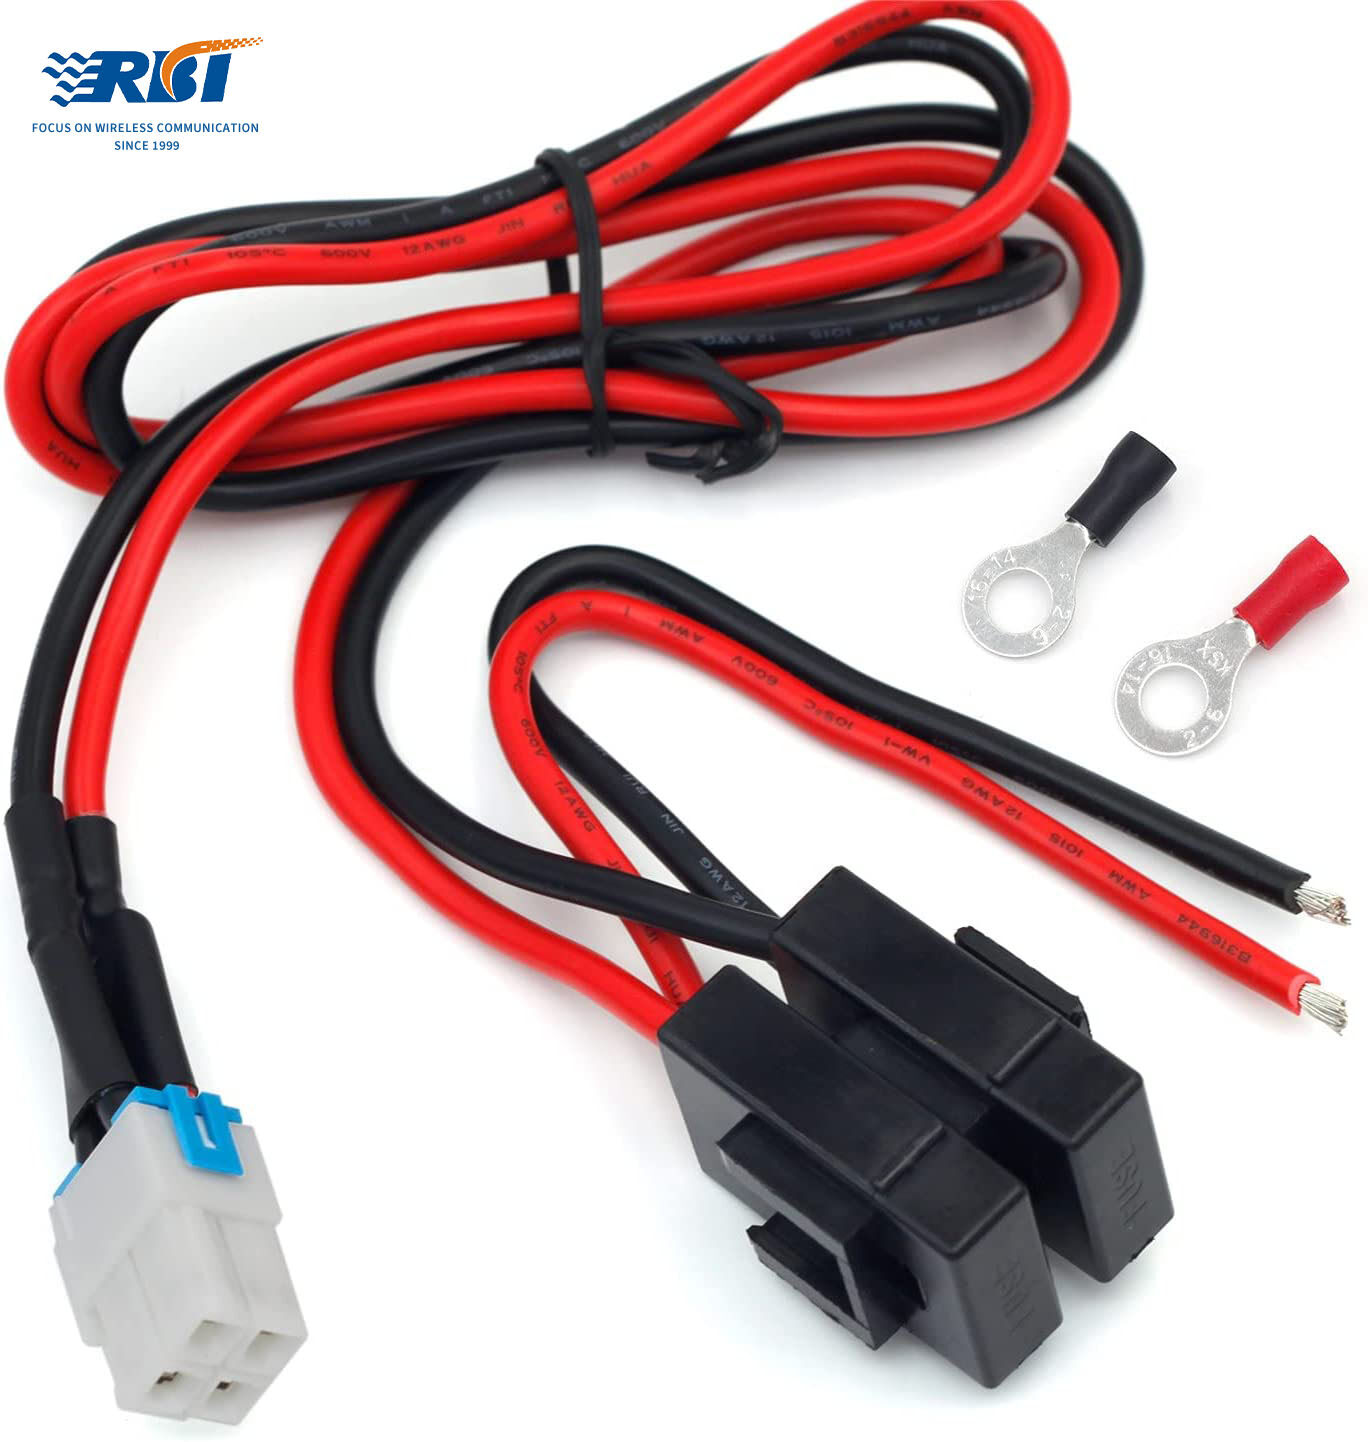 FT-450D power cable